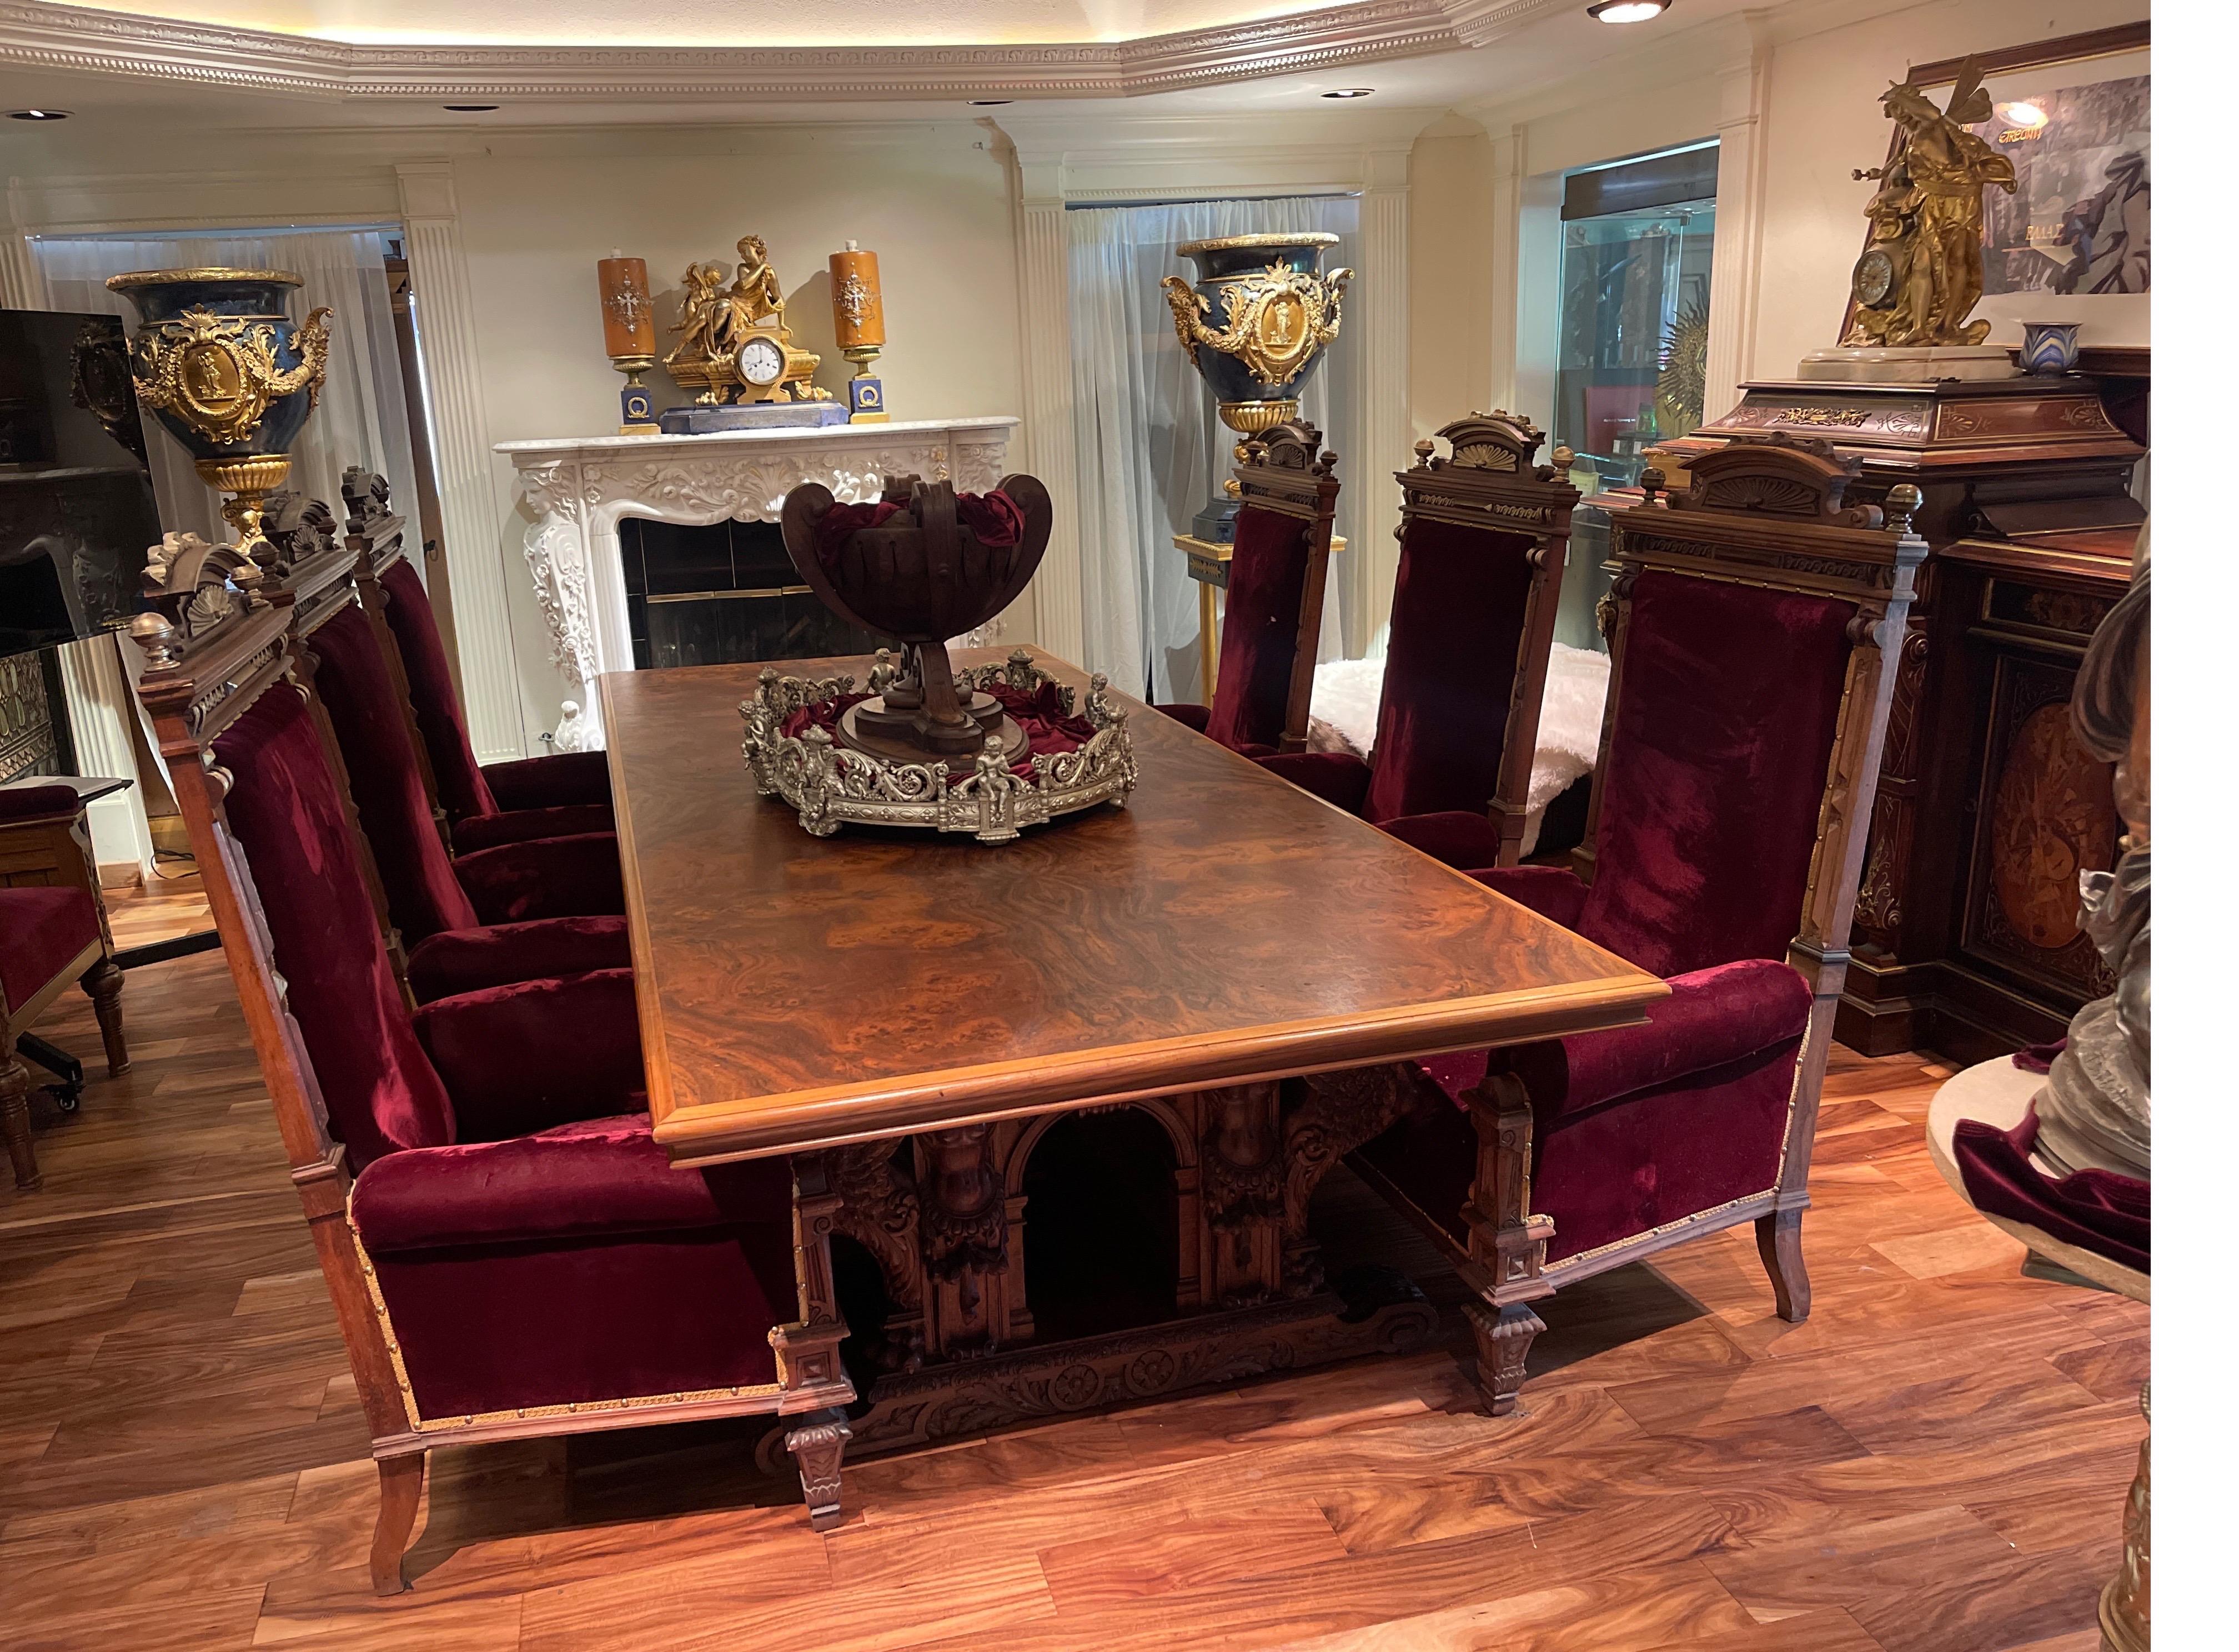 19th century Carved Burled Walnut Dinning Table with Red Velvet Arm Chairs.